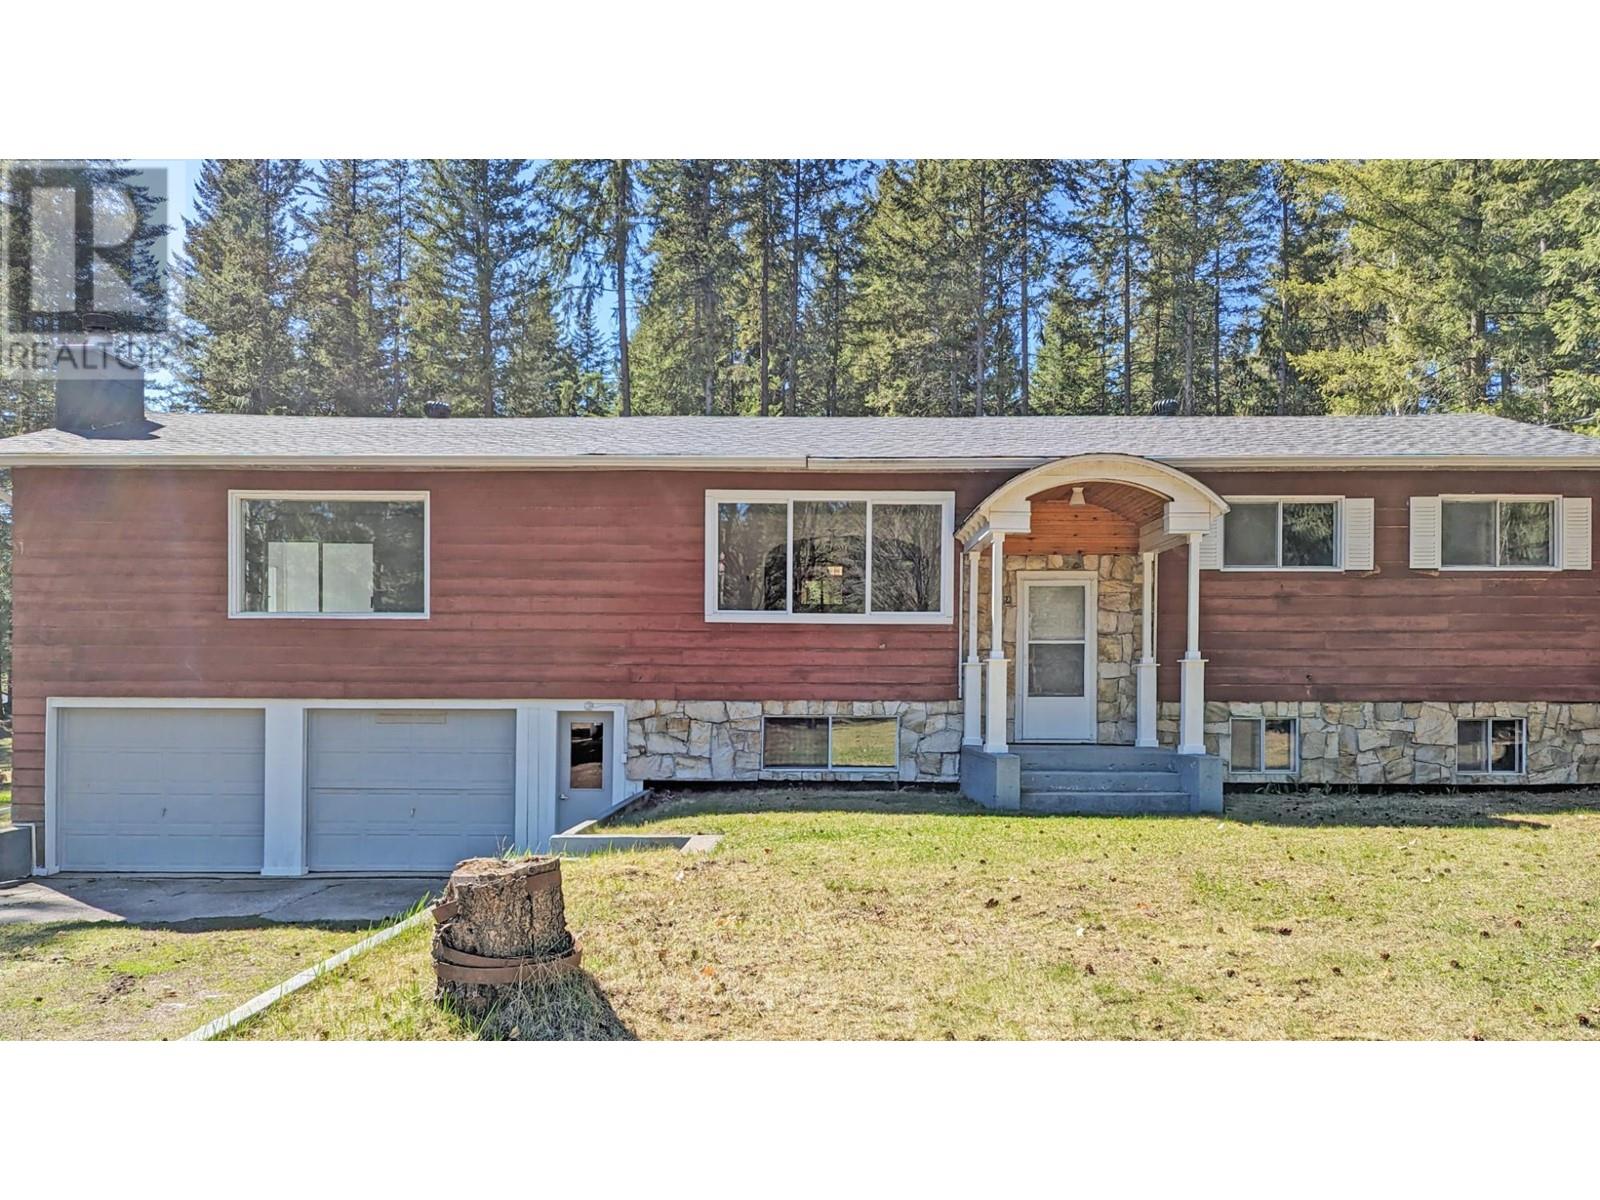 1129 MOUNTAINVIEW ROAD located in Clearwater, British Columbia